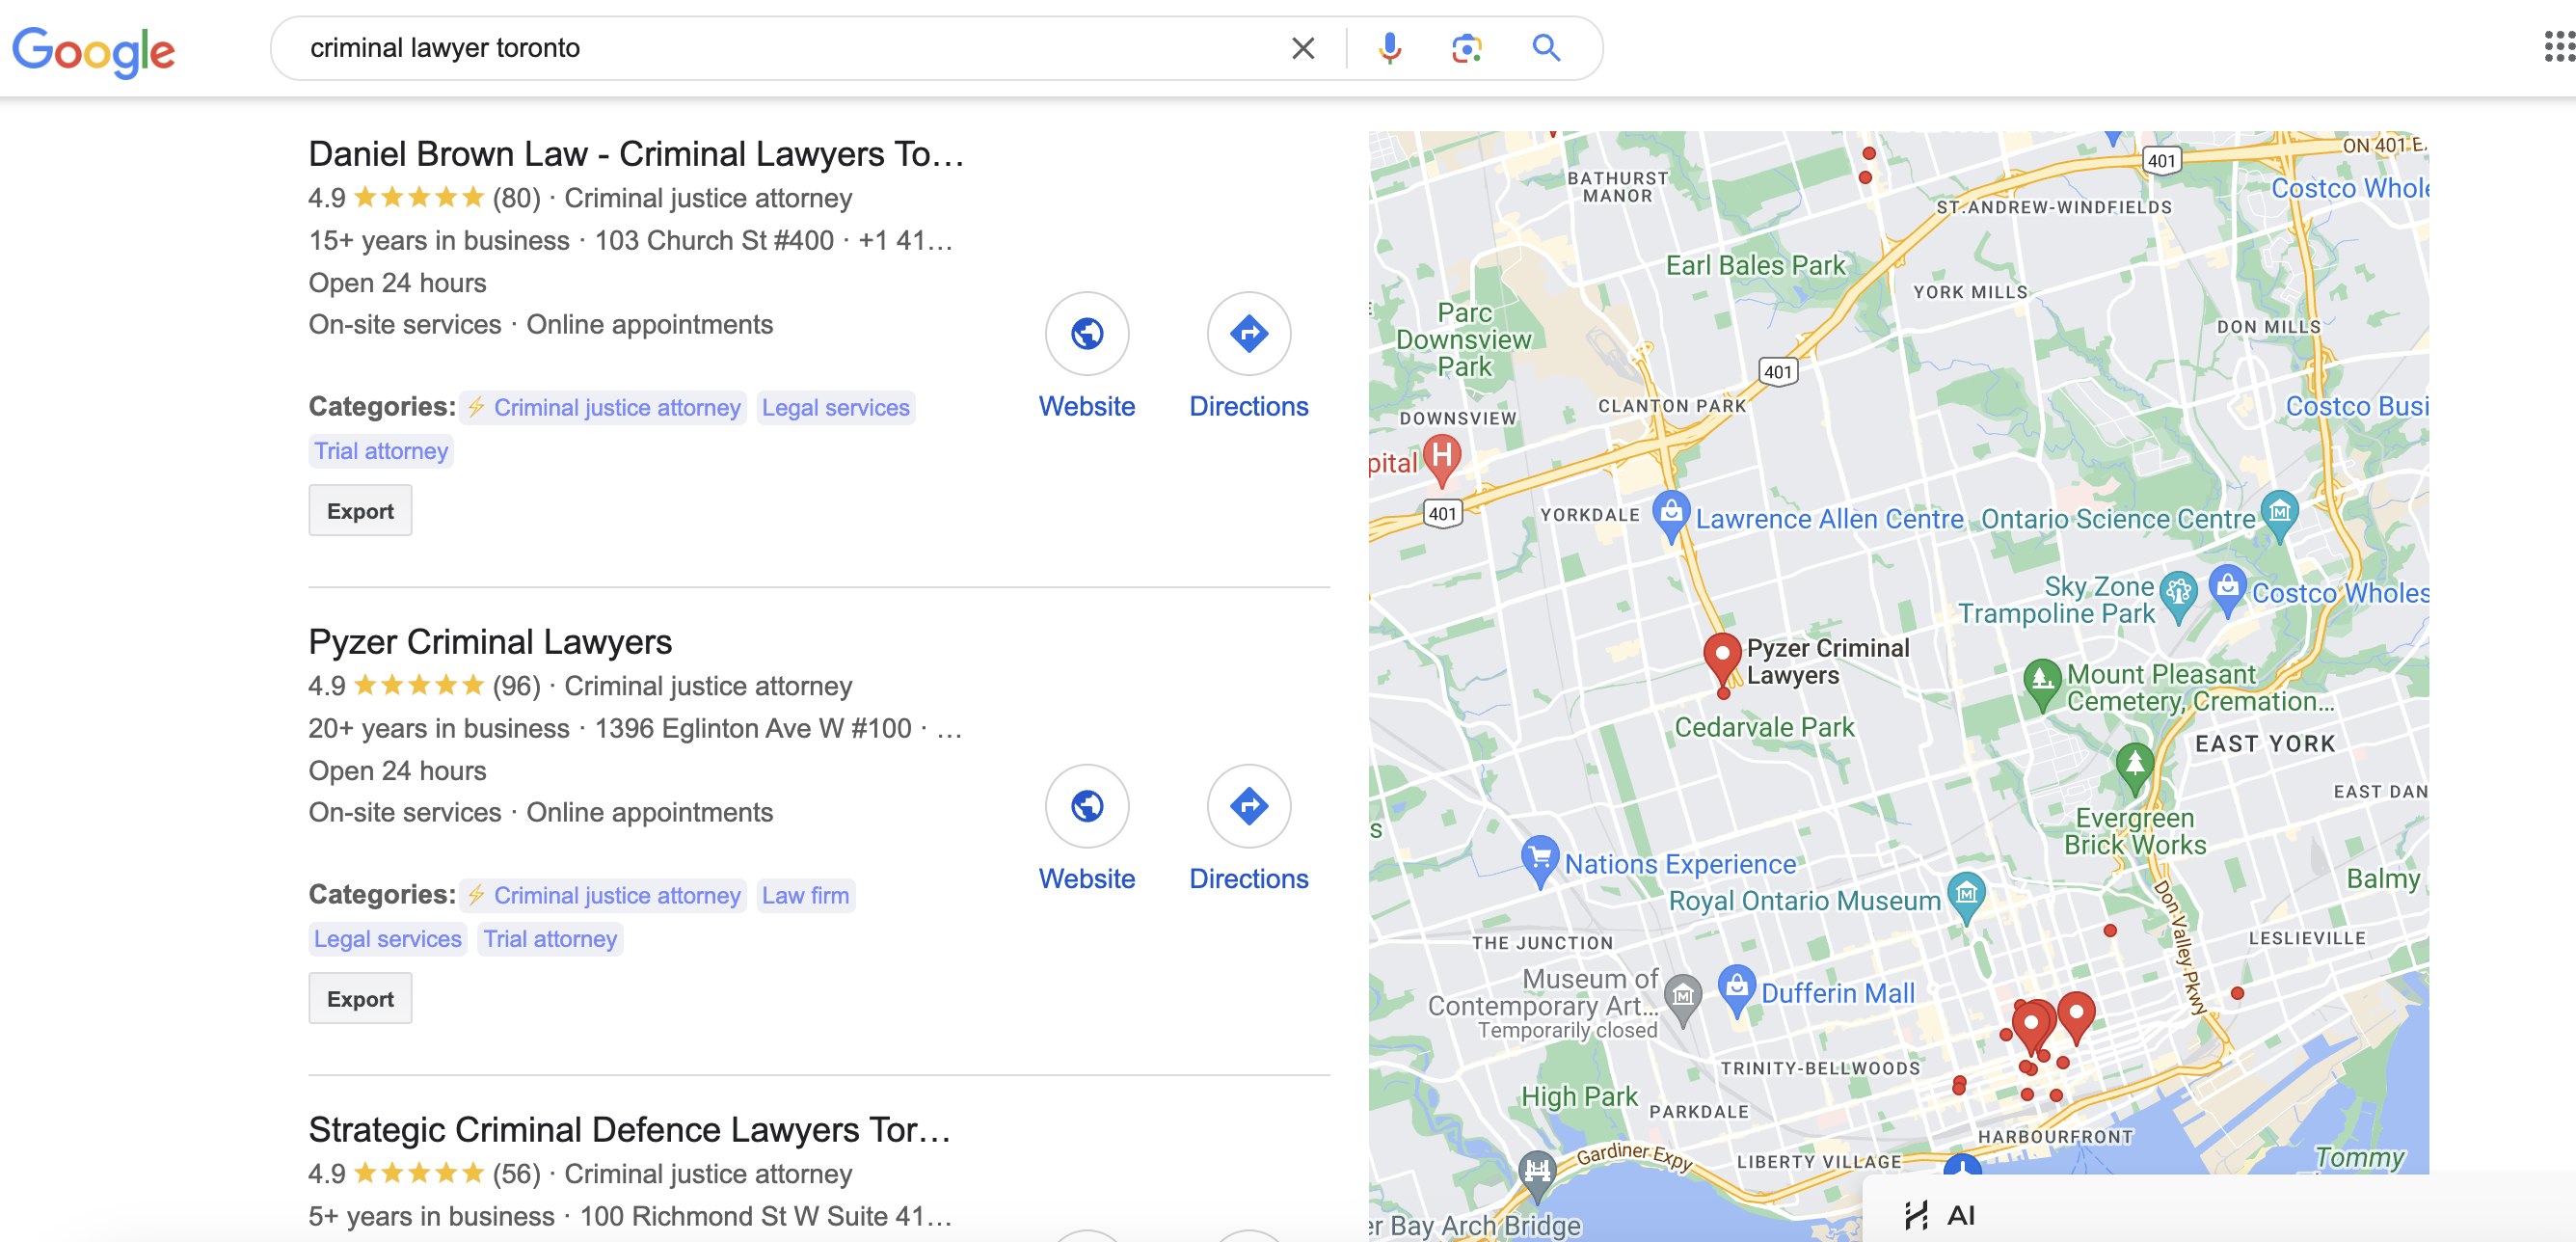 The Example of Google Business Profile ranking for criminal lawyer Toronto